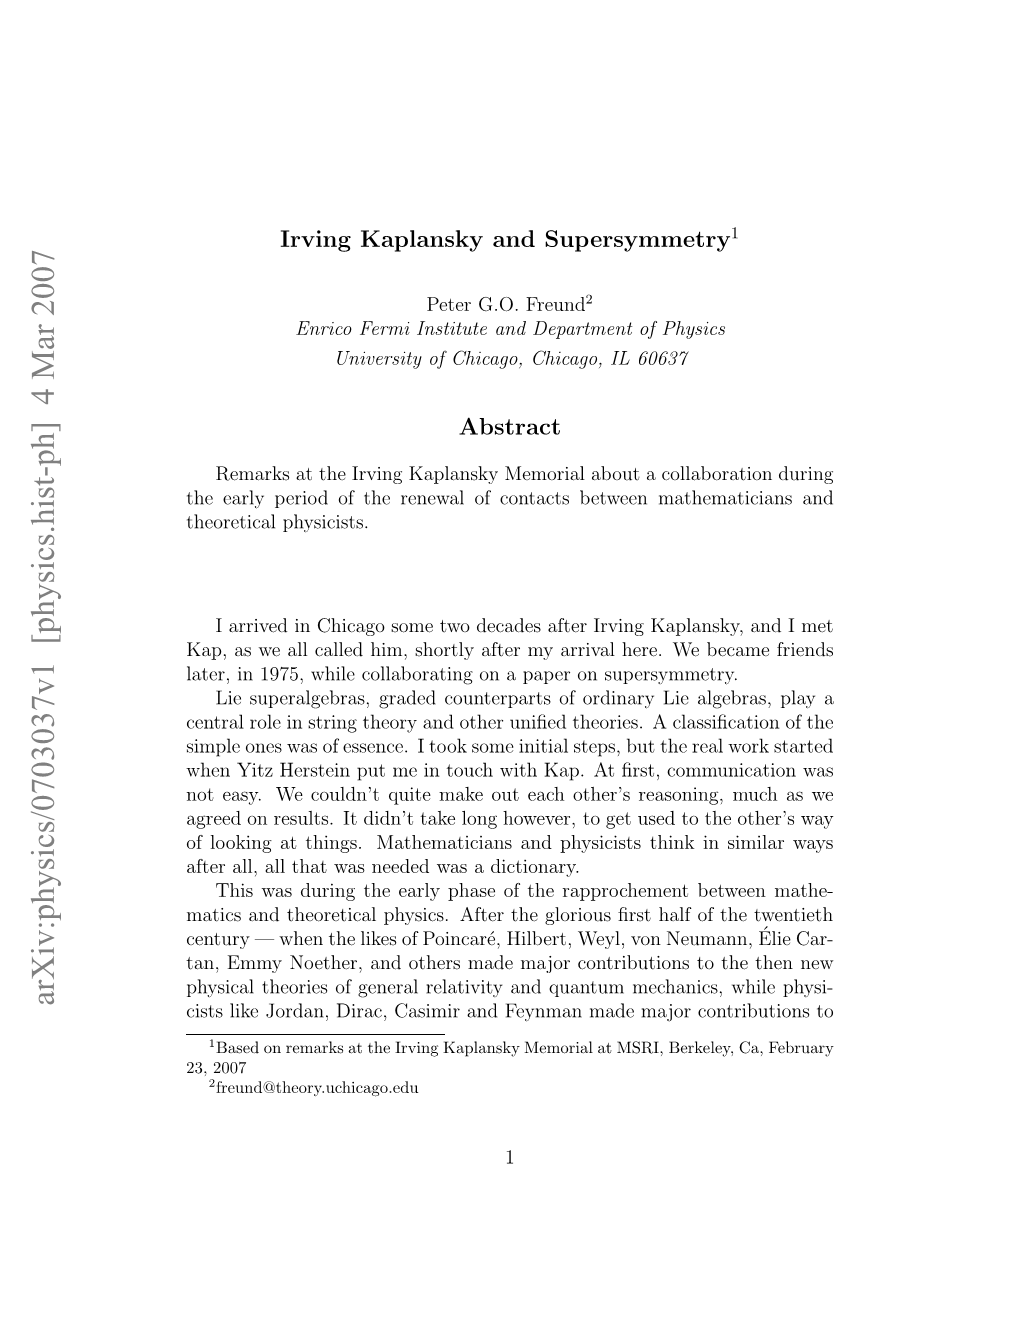 Irving Kaplansky and Supersymmetry